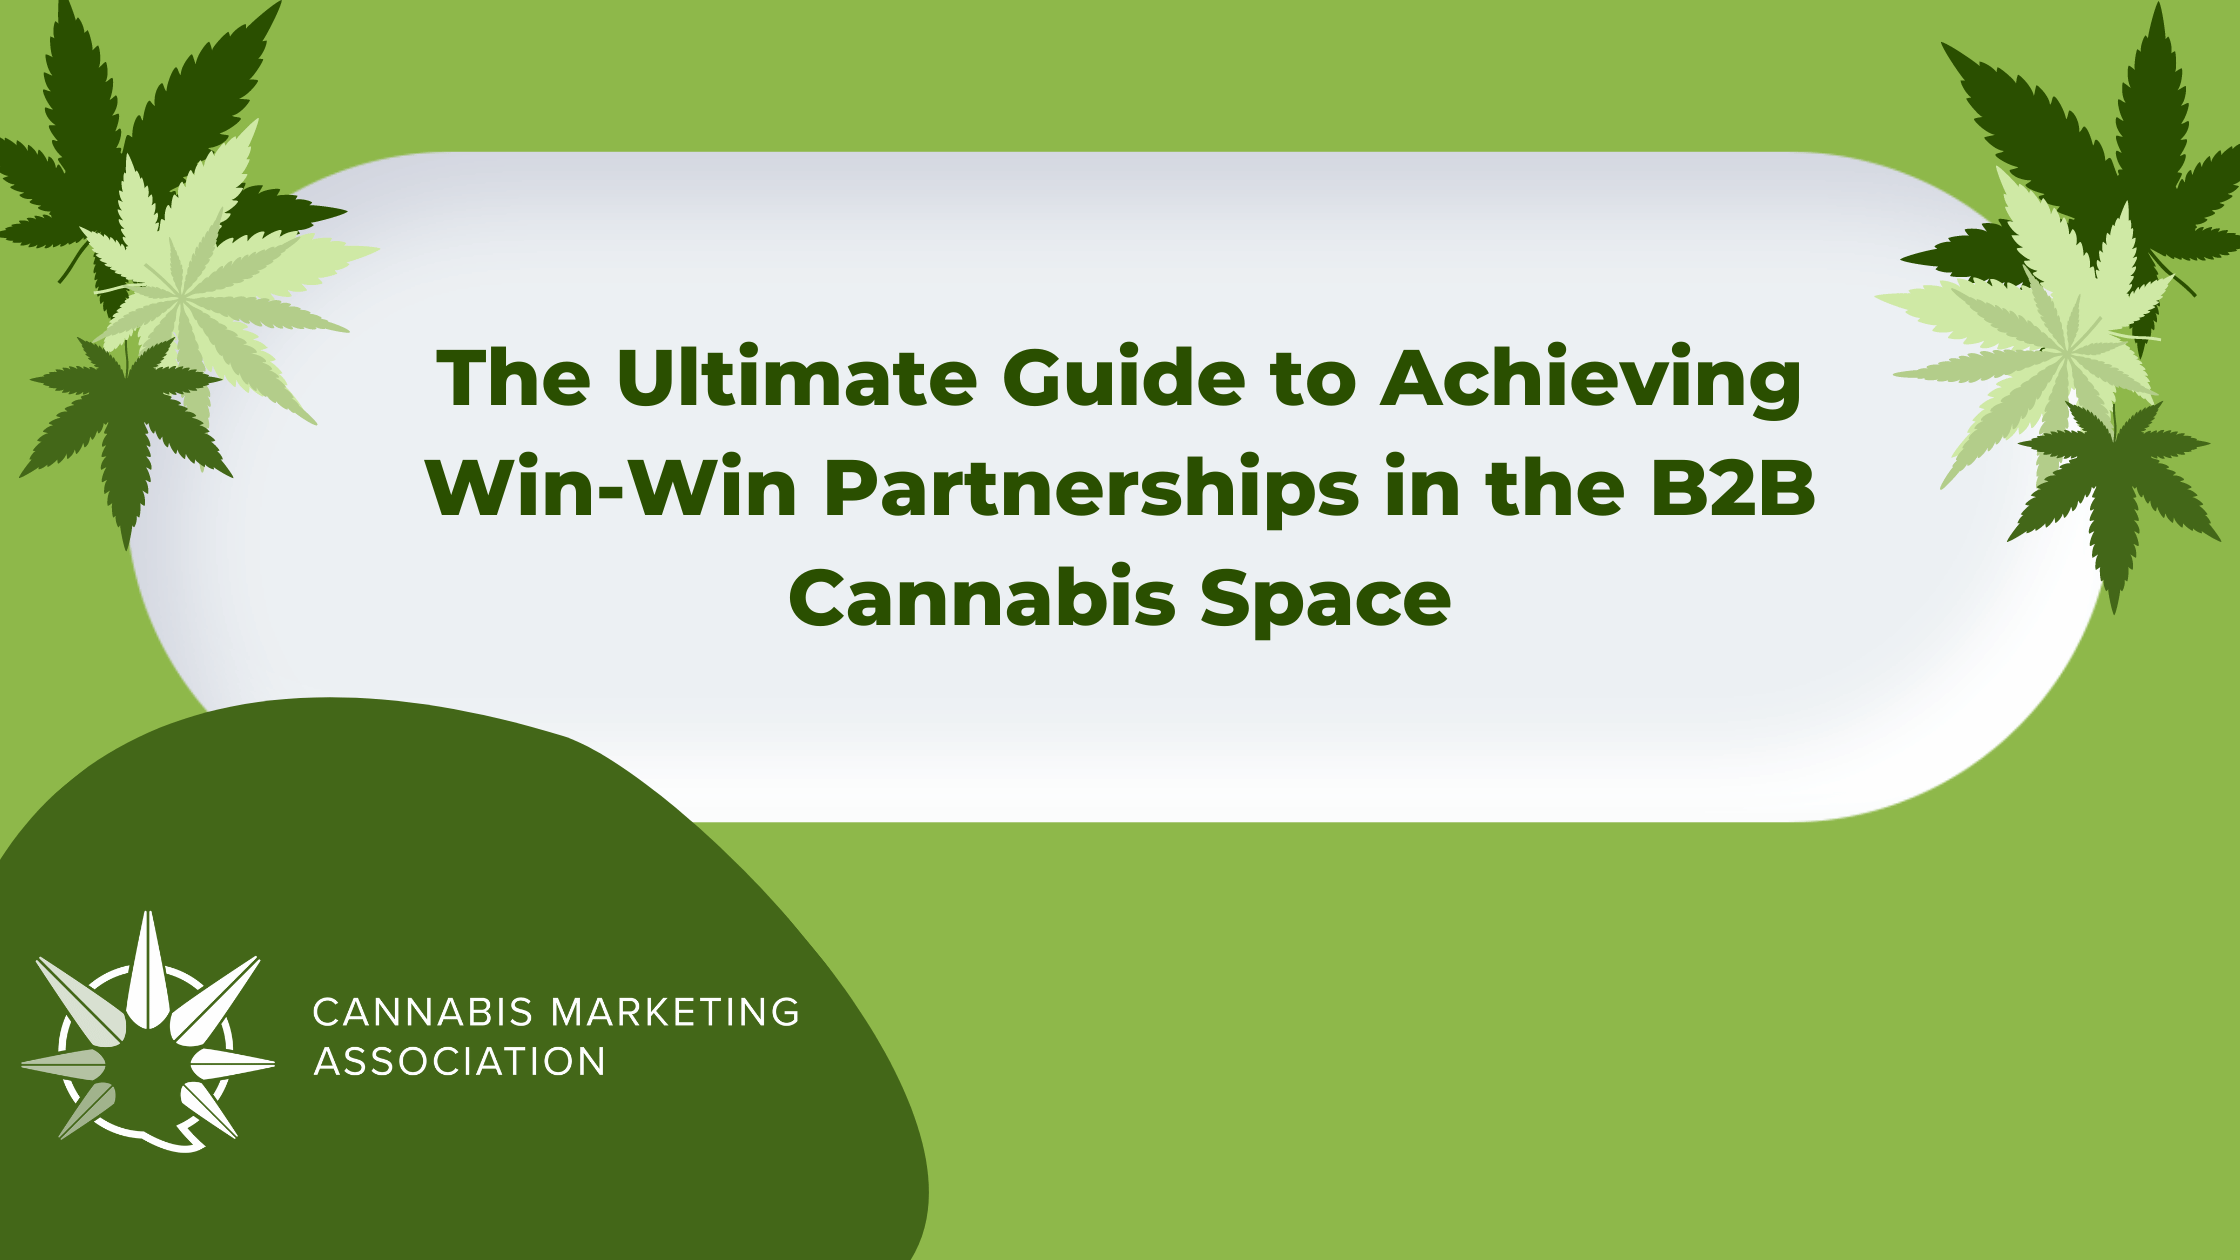 The Ultimate Guide to Achieving Win-Win Partnerships in the B2B Cannabis Space